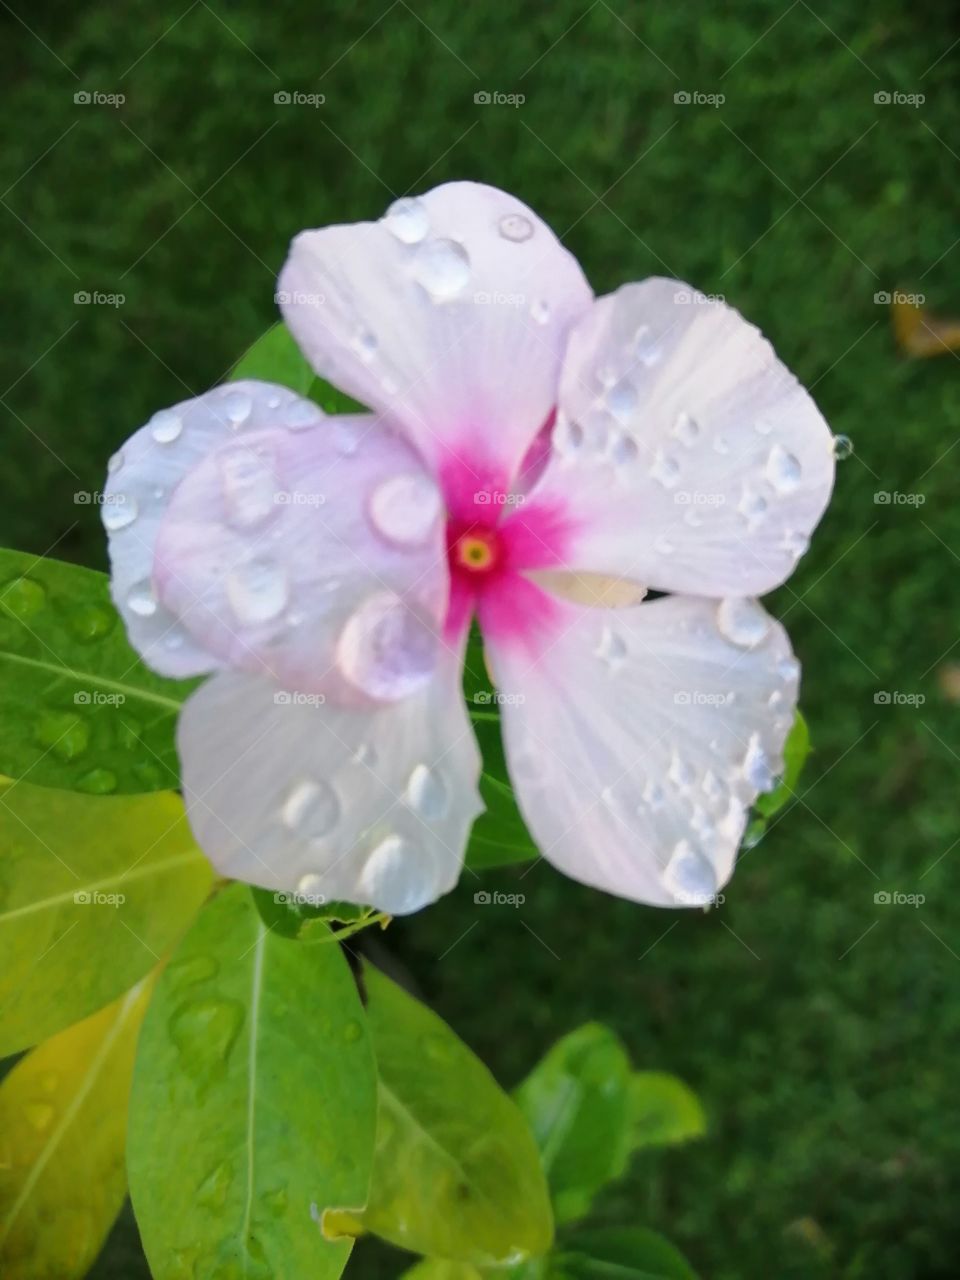 The fresh flower with raindrops.
It looks very nice.